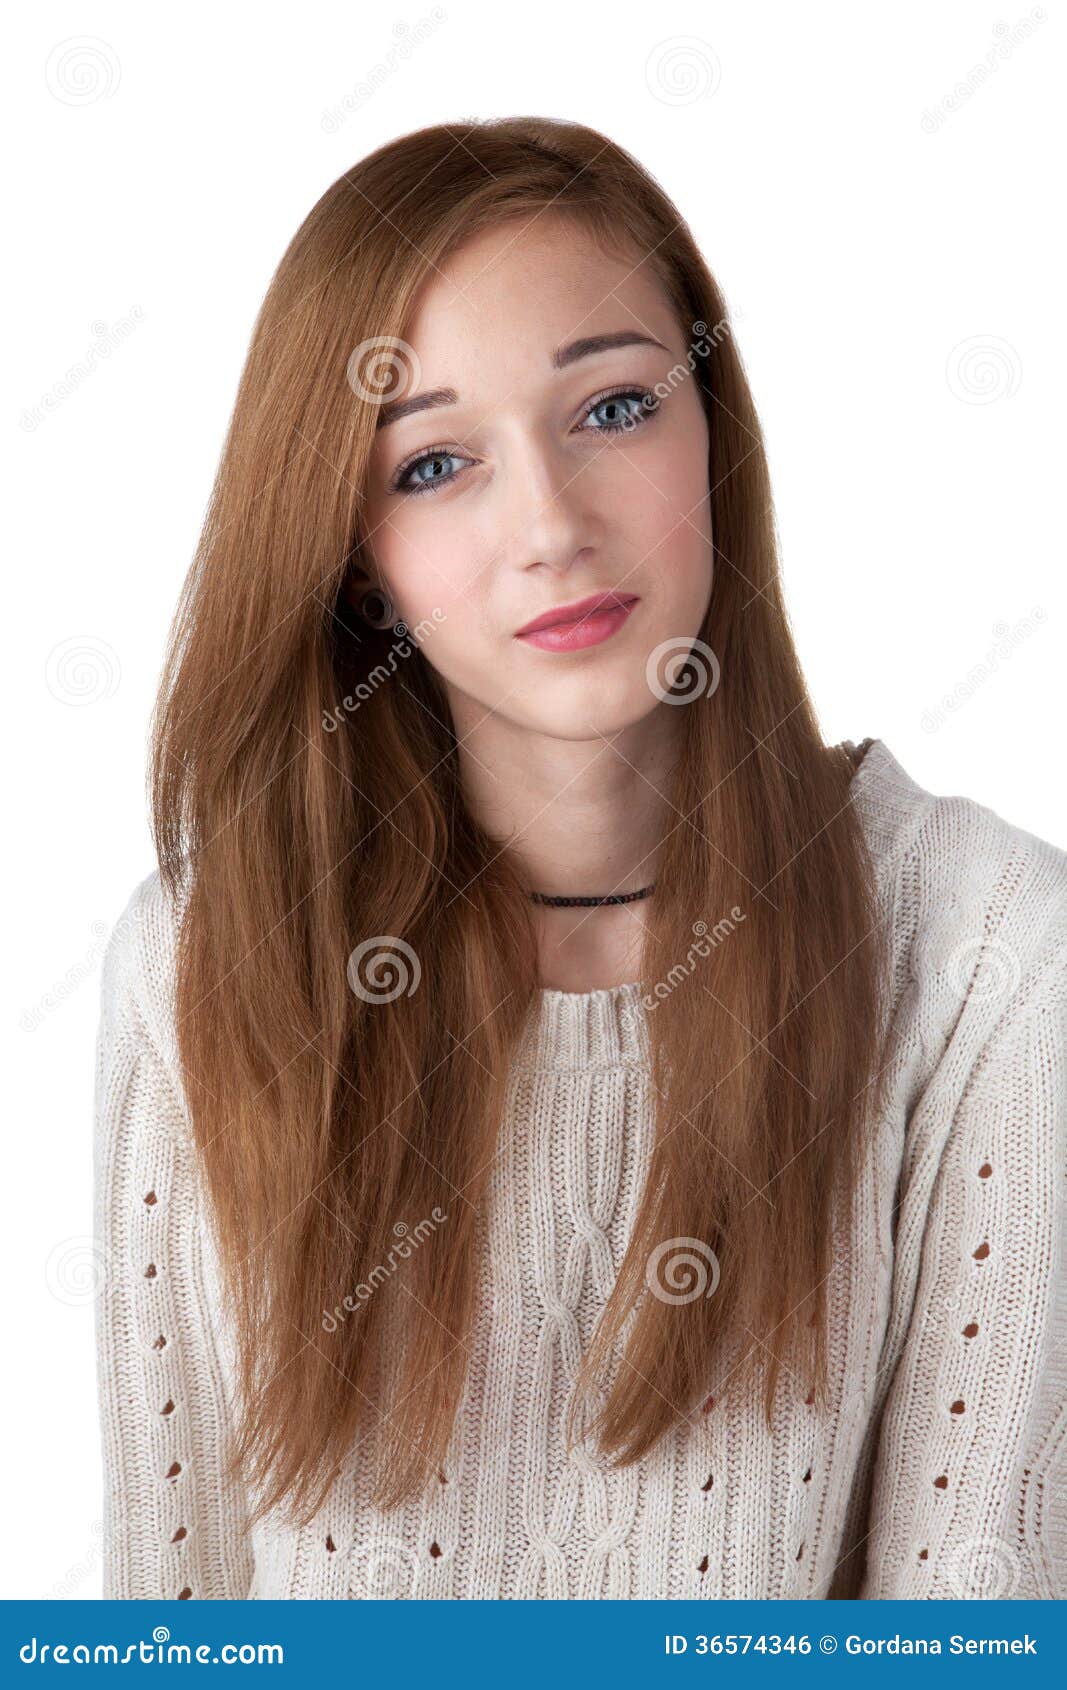 Teenage girl with red hair stock photo. Image of expression - 36574346